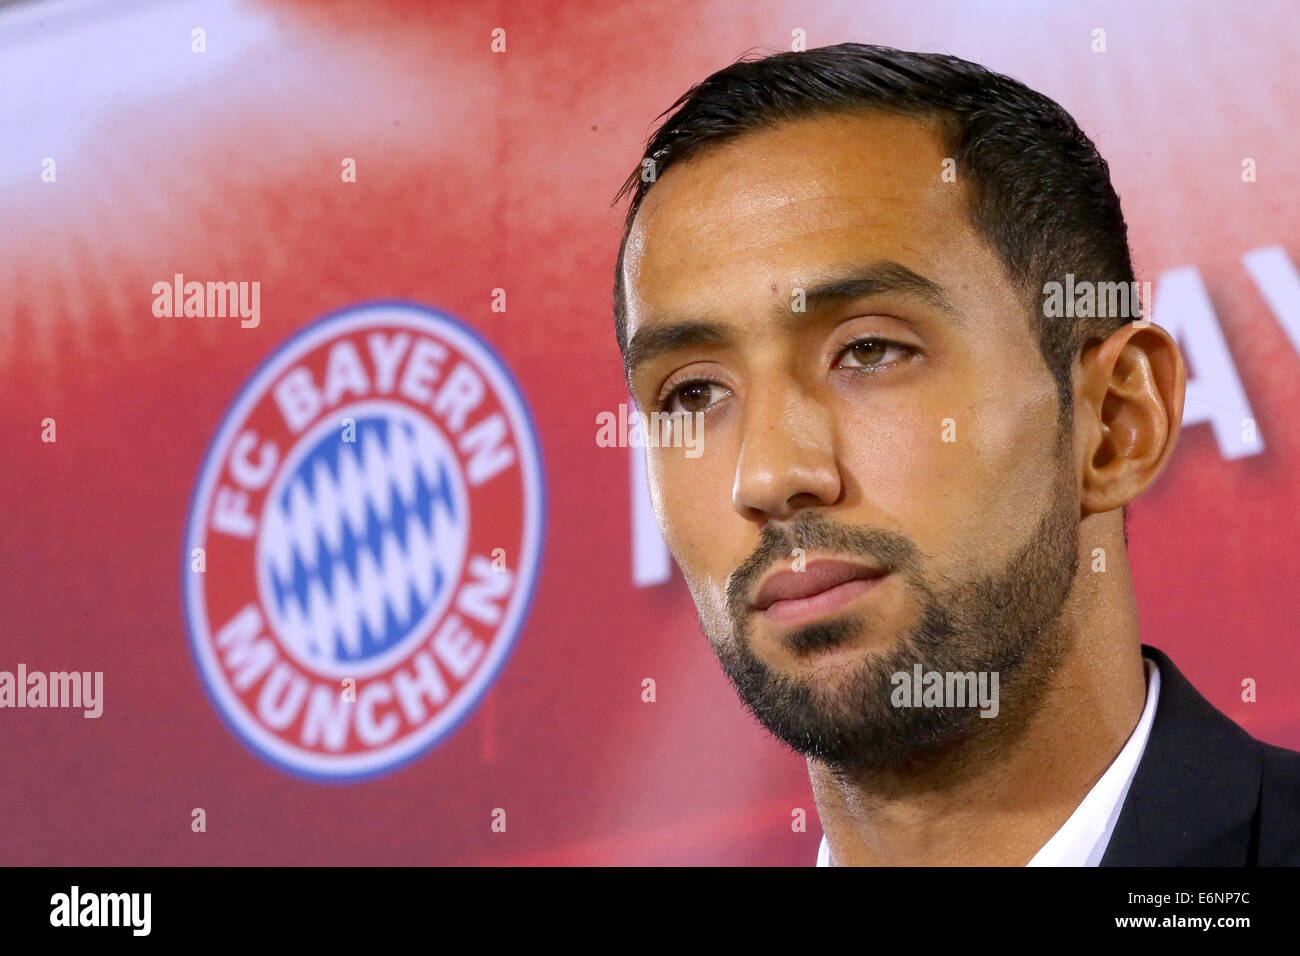 Munich, Germany. 28th Aug, 2014. Mehdi Benatia of FC Bayern Muenchen looks on during a press conference at Bayern Muenchen's headquarter Saebener Strasse on August 28, 2014 in Munich, Germany. Photo: Alexander Hassenstein/dpa/Alamy Live News Stock Photo